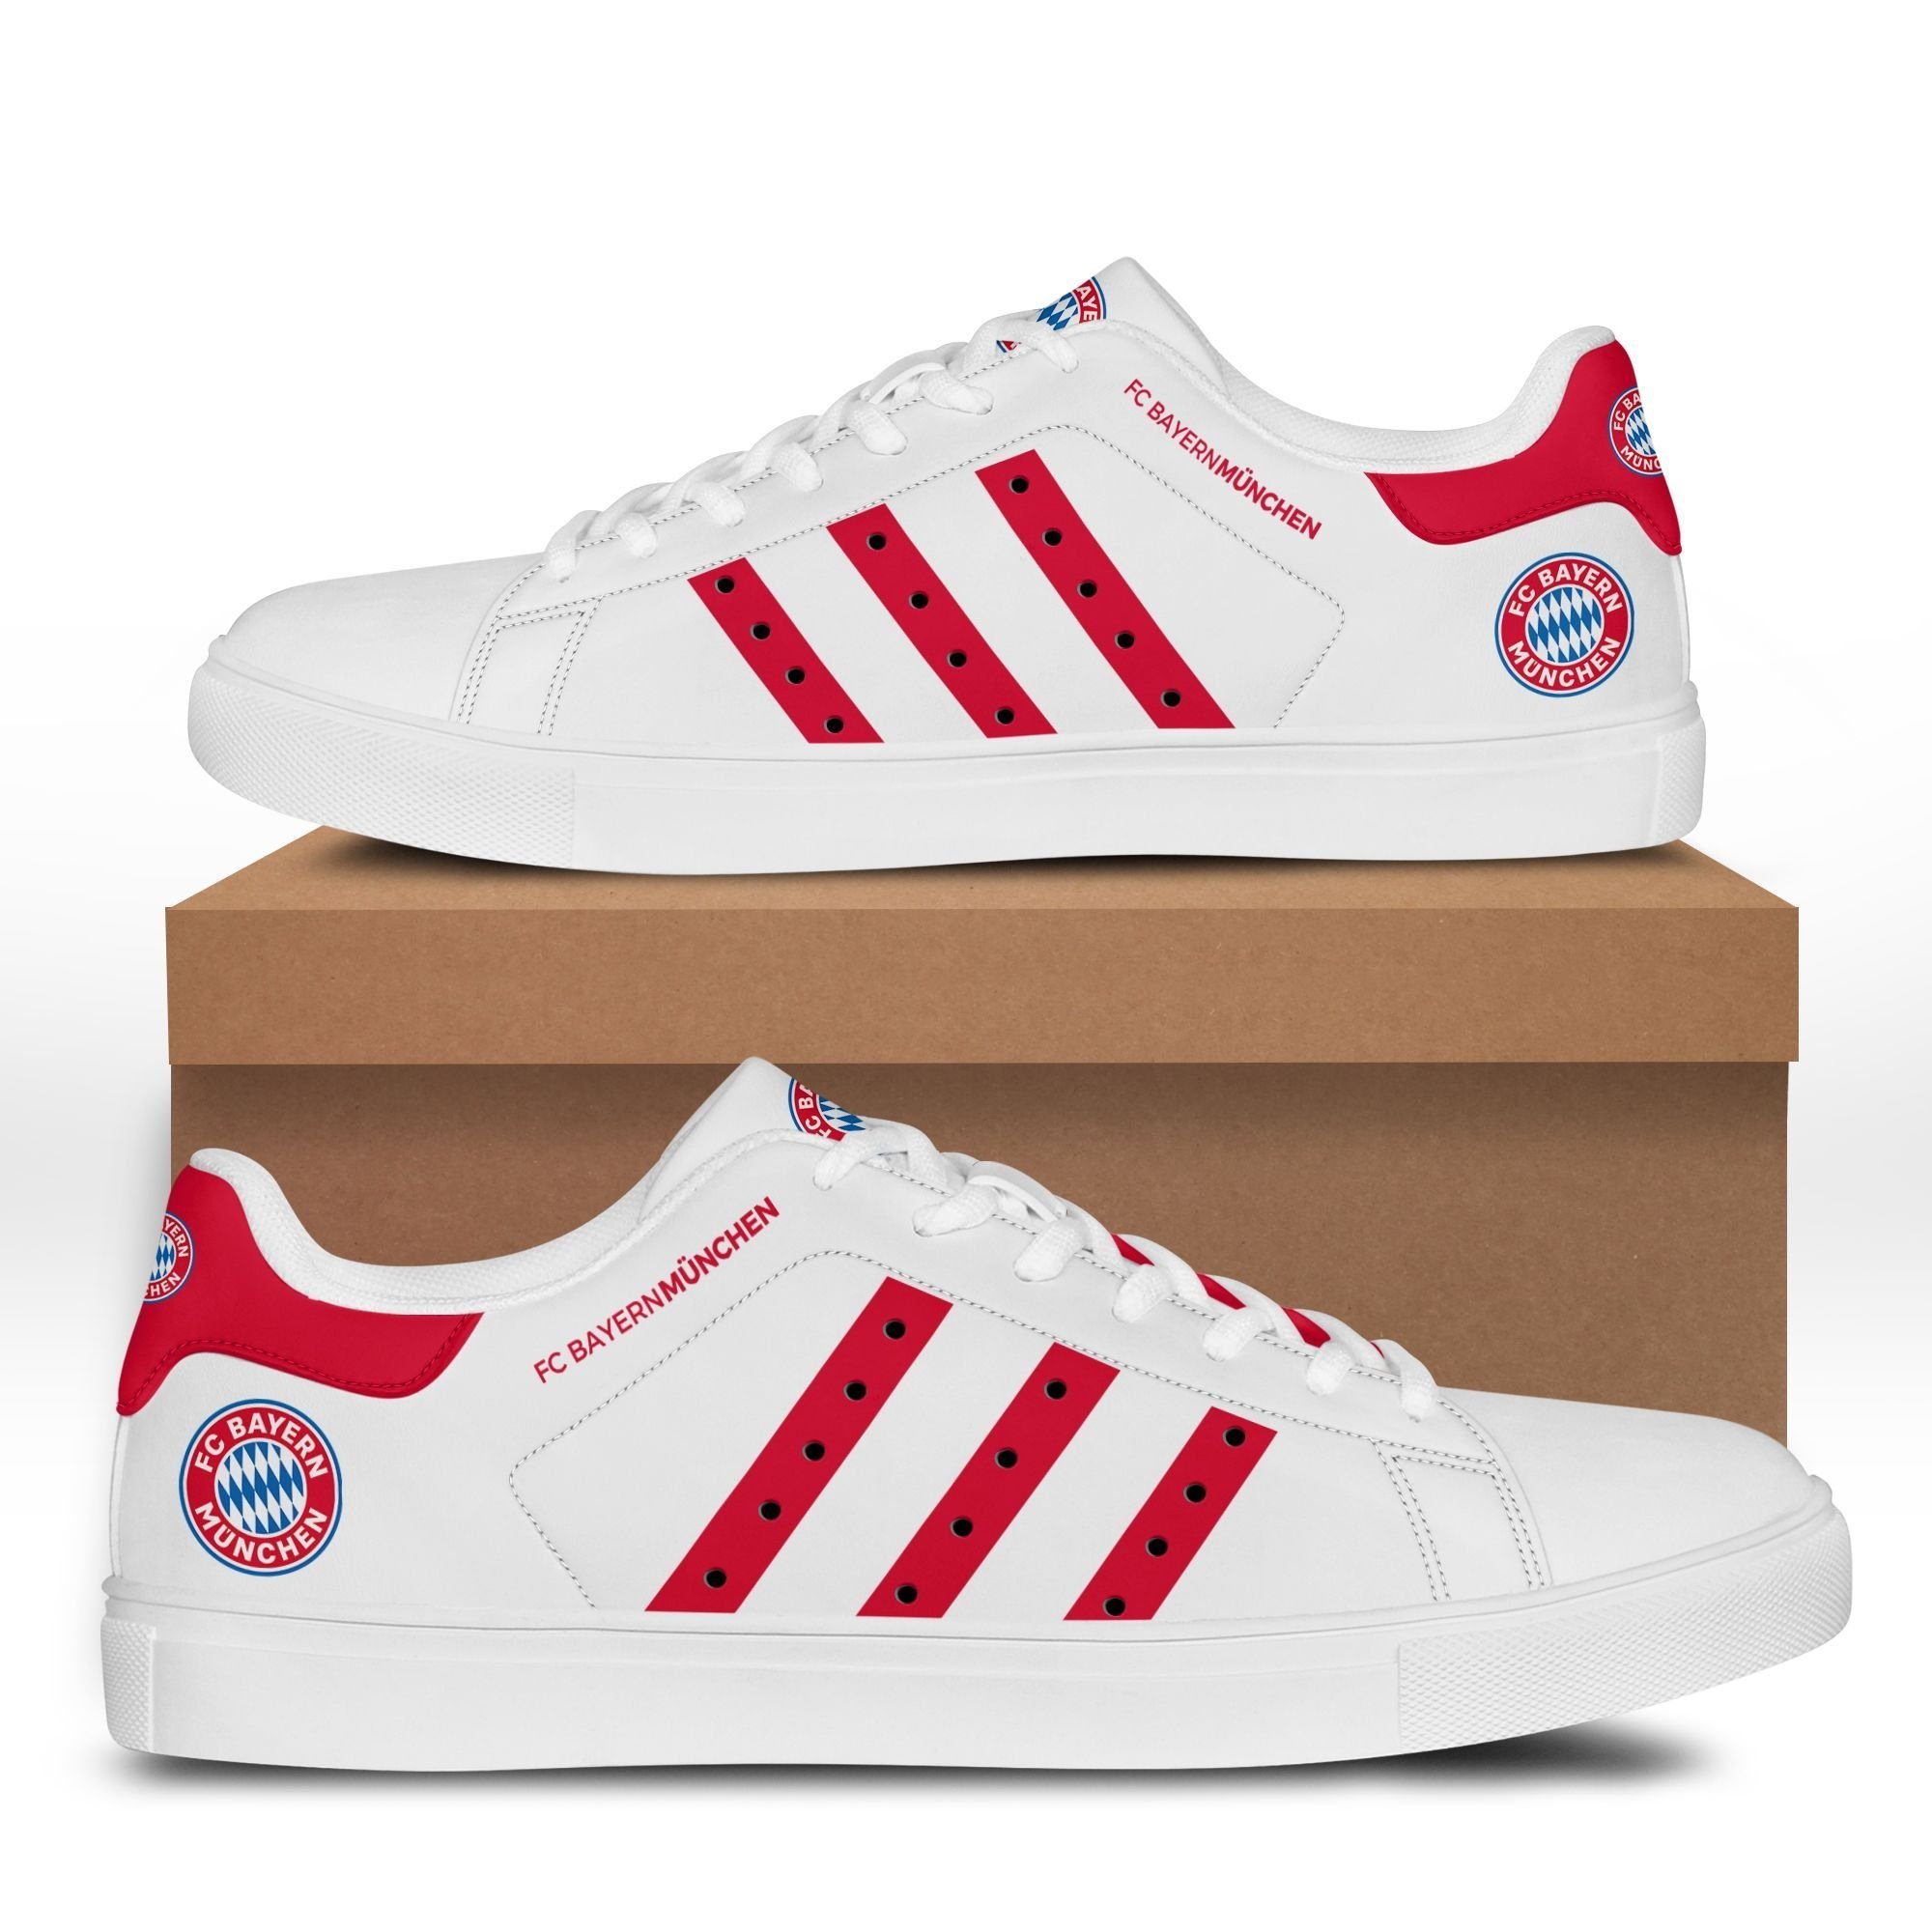 Bayern Munchen stan smith shoes - Picture 1